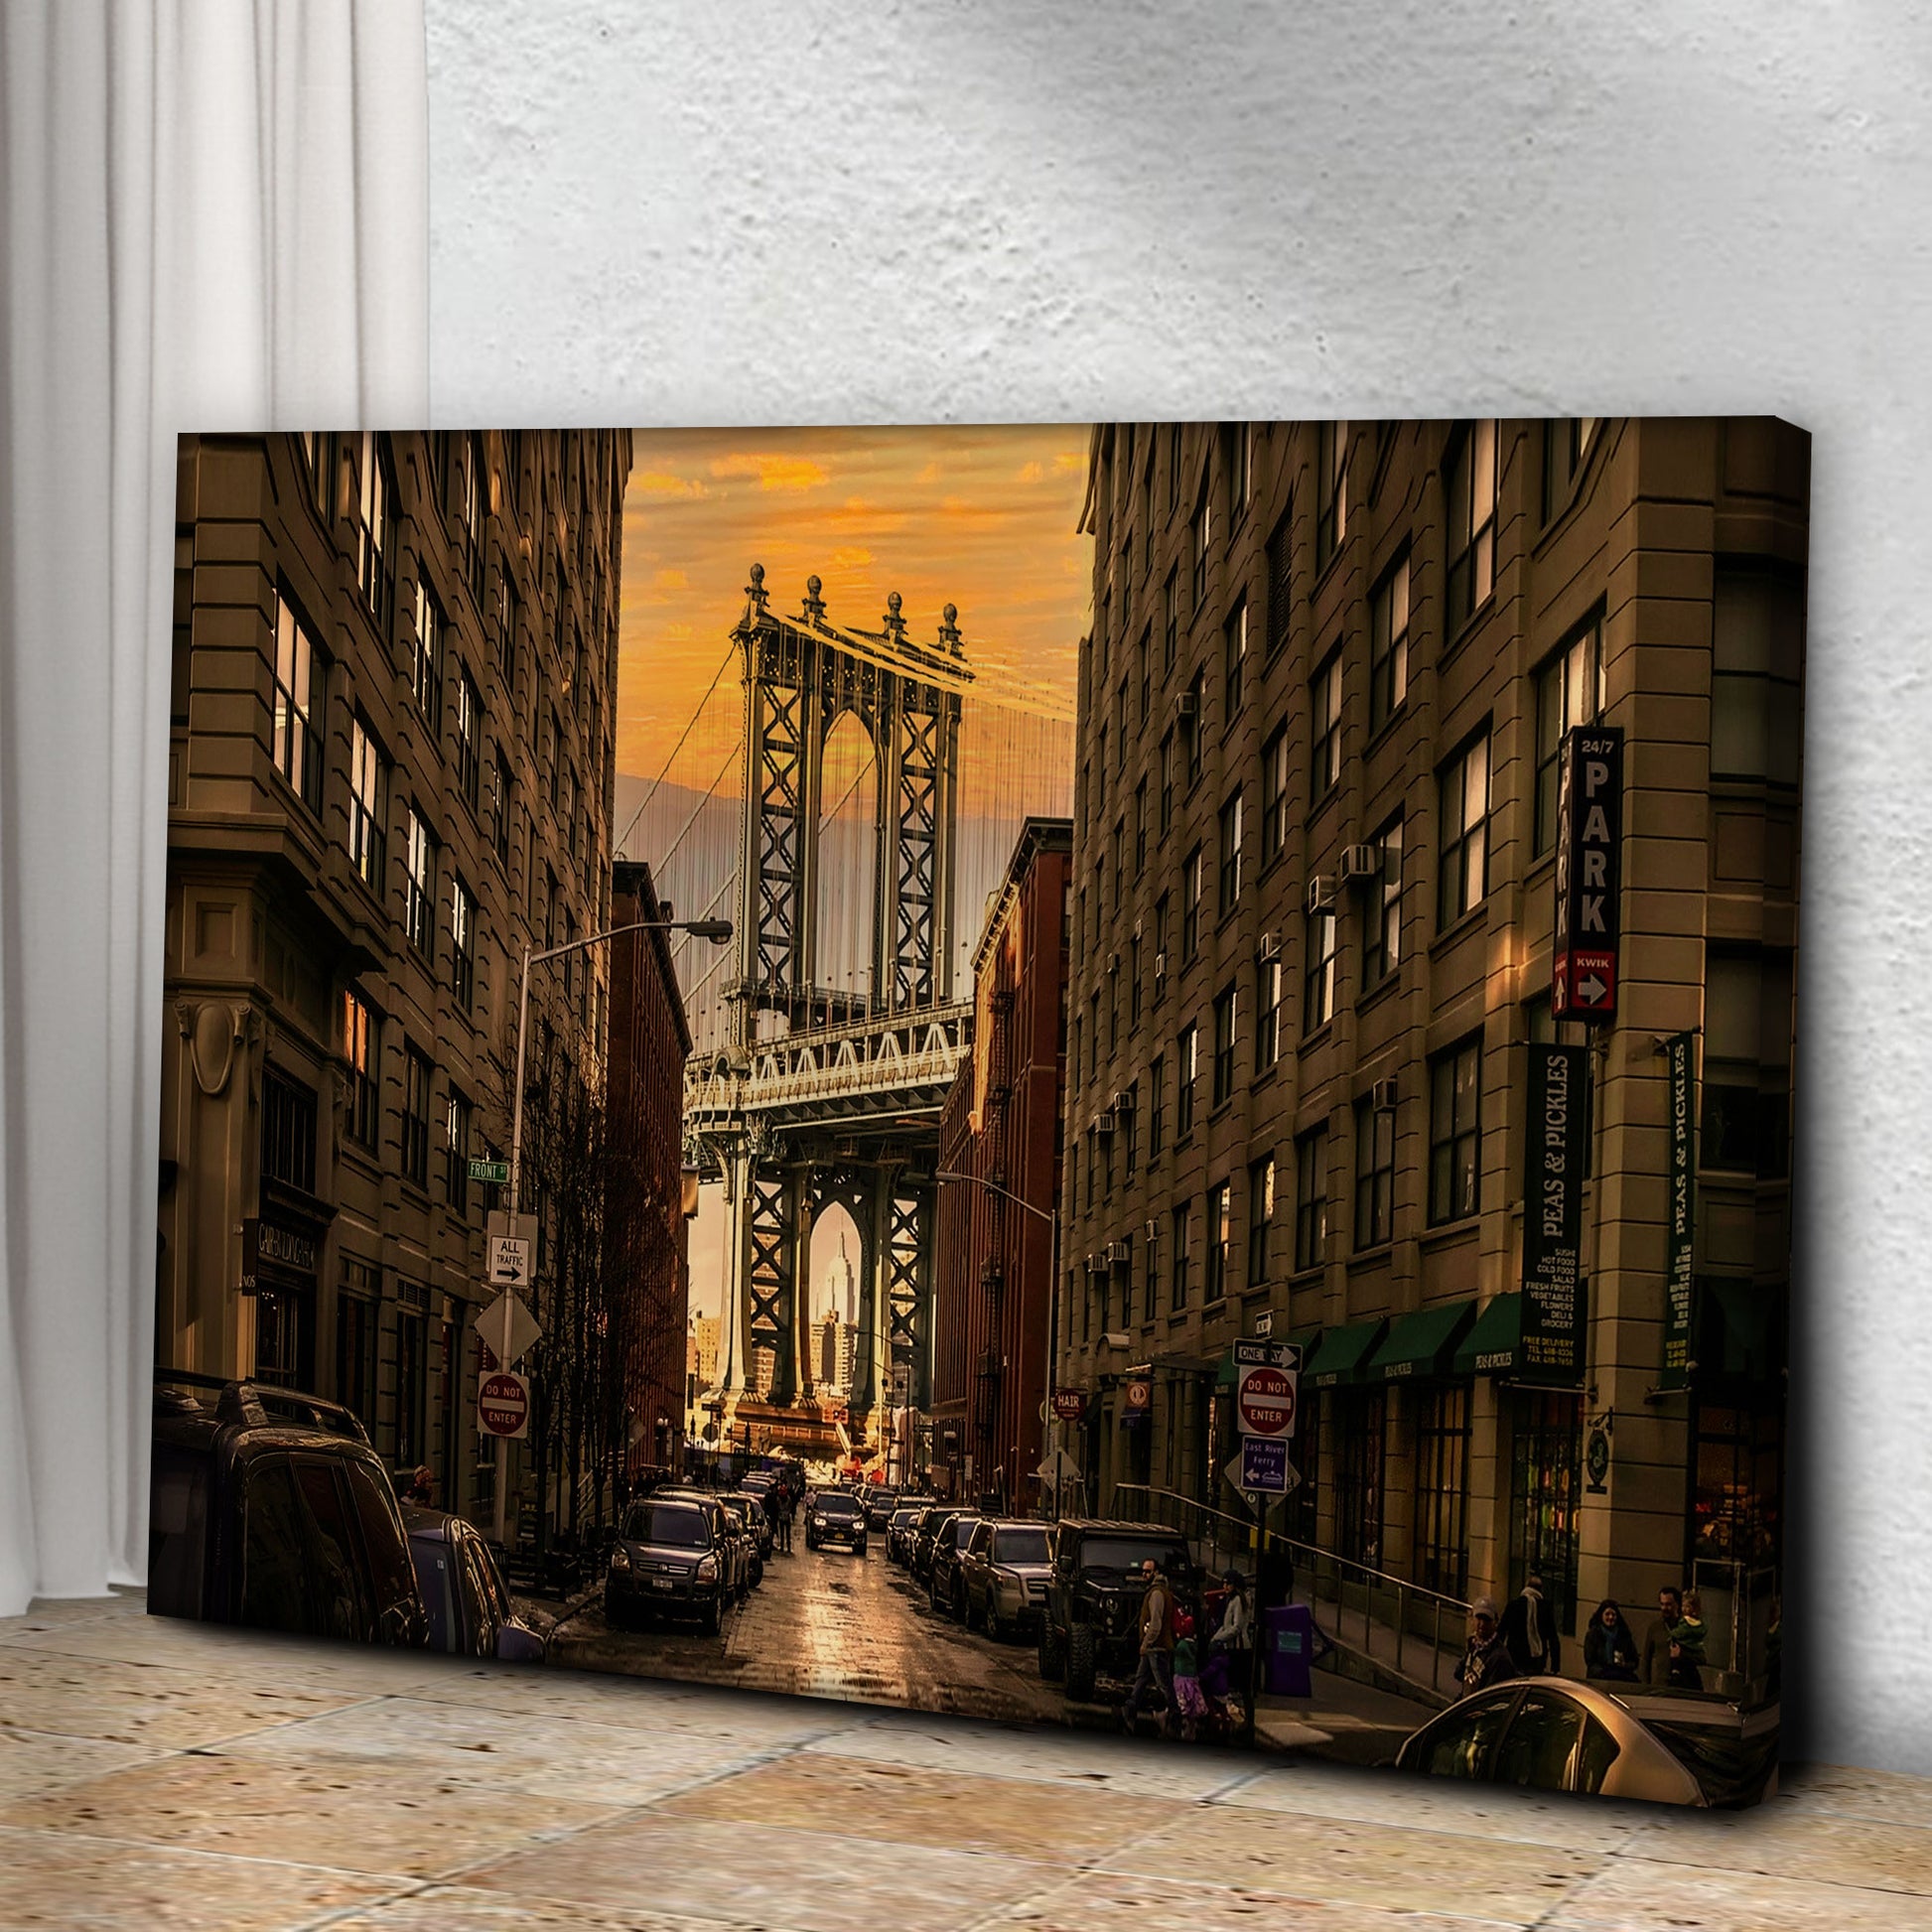 Glimpse Of Brooklyn Bridge Canvas Wall Art Style 1 - Image by Tailored Canvases